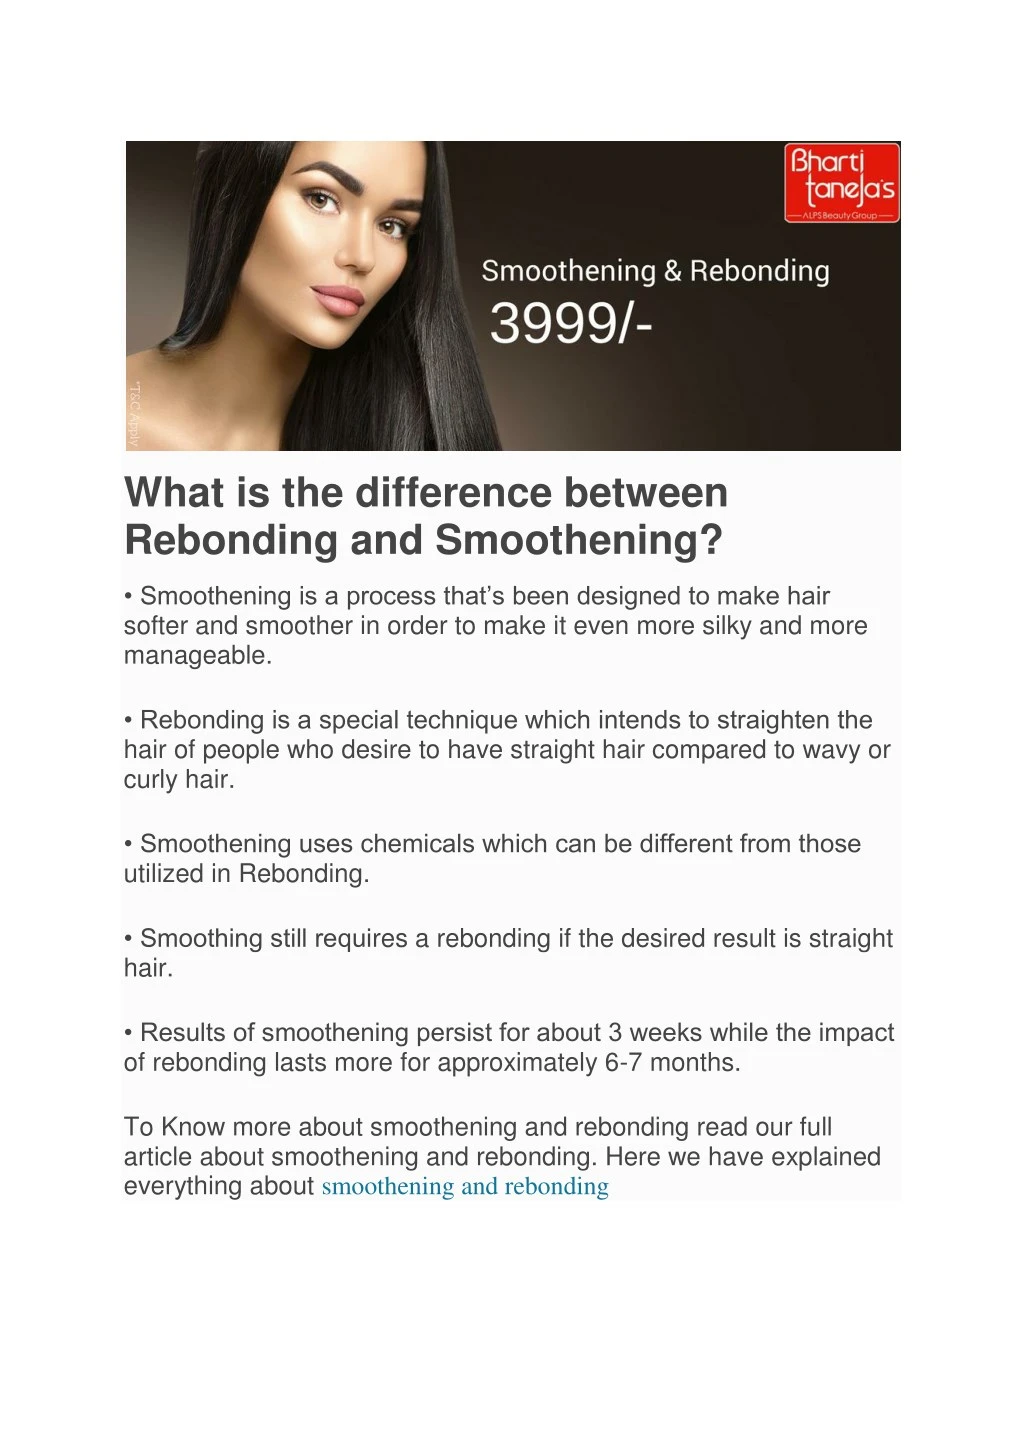 what is the difference between rebonding